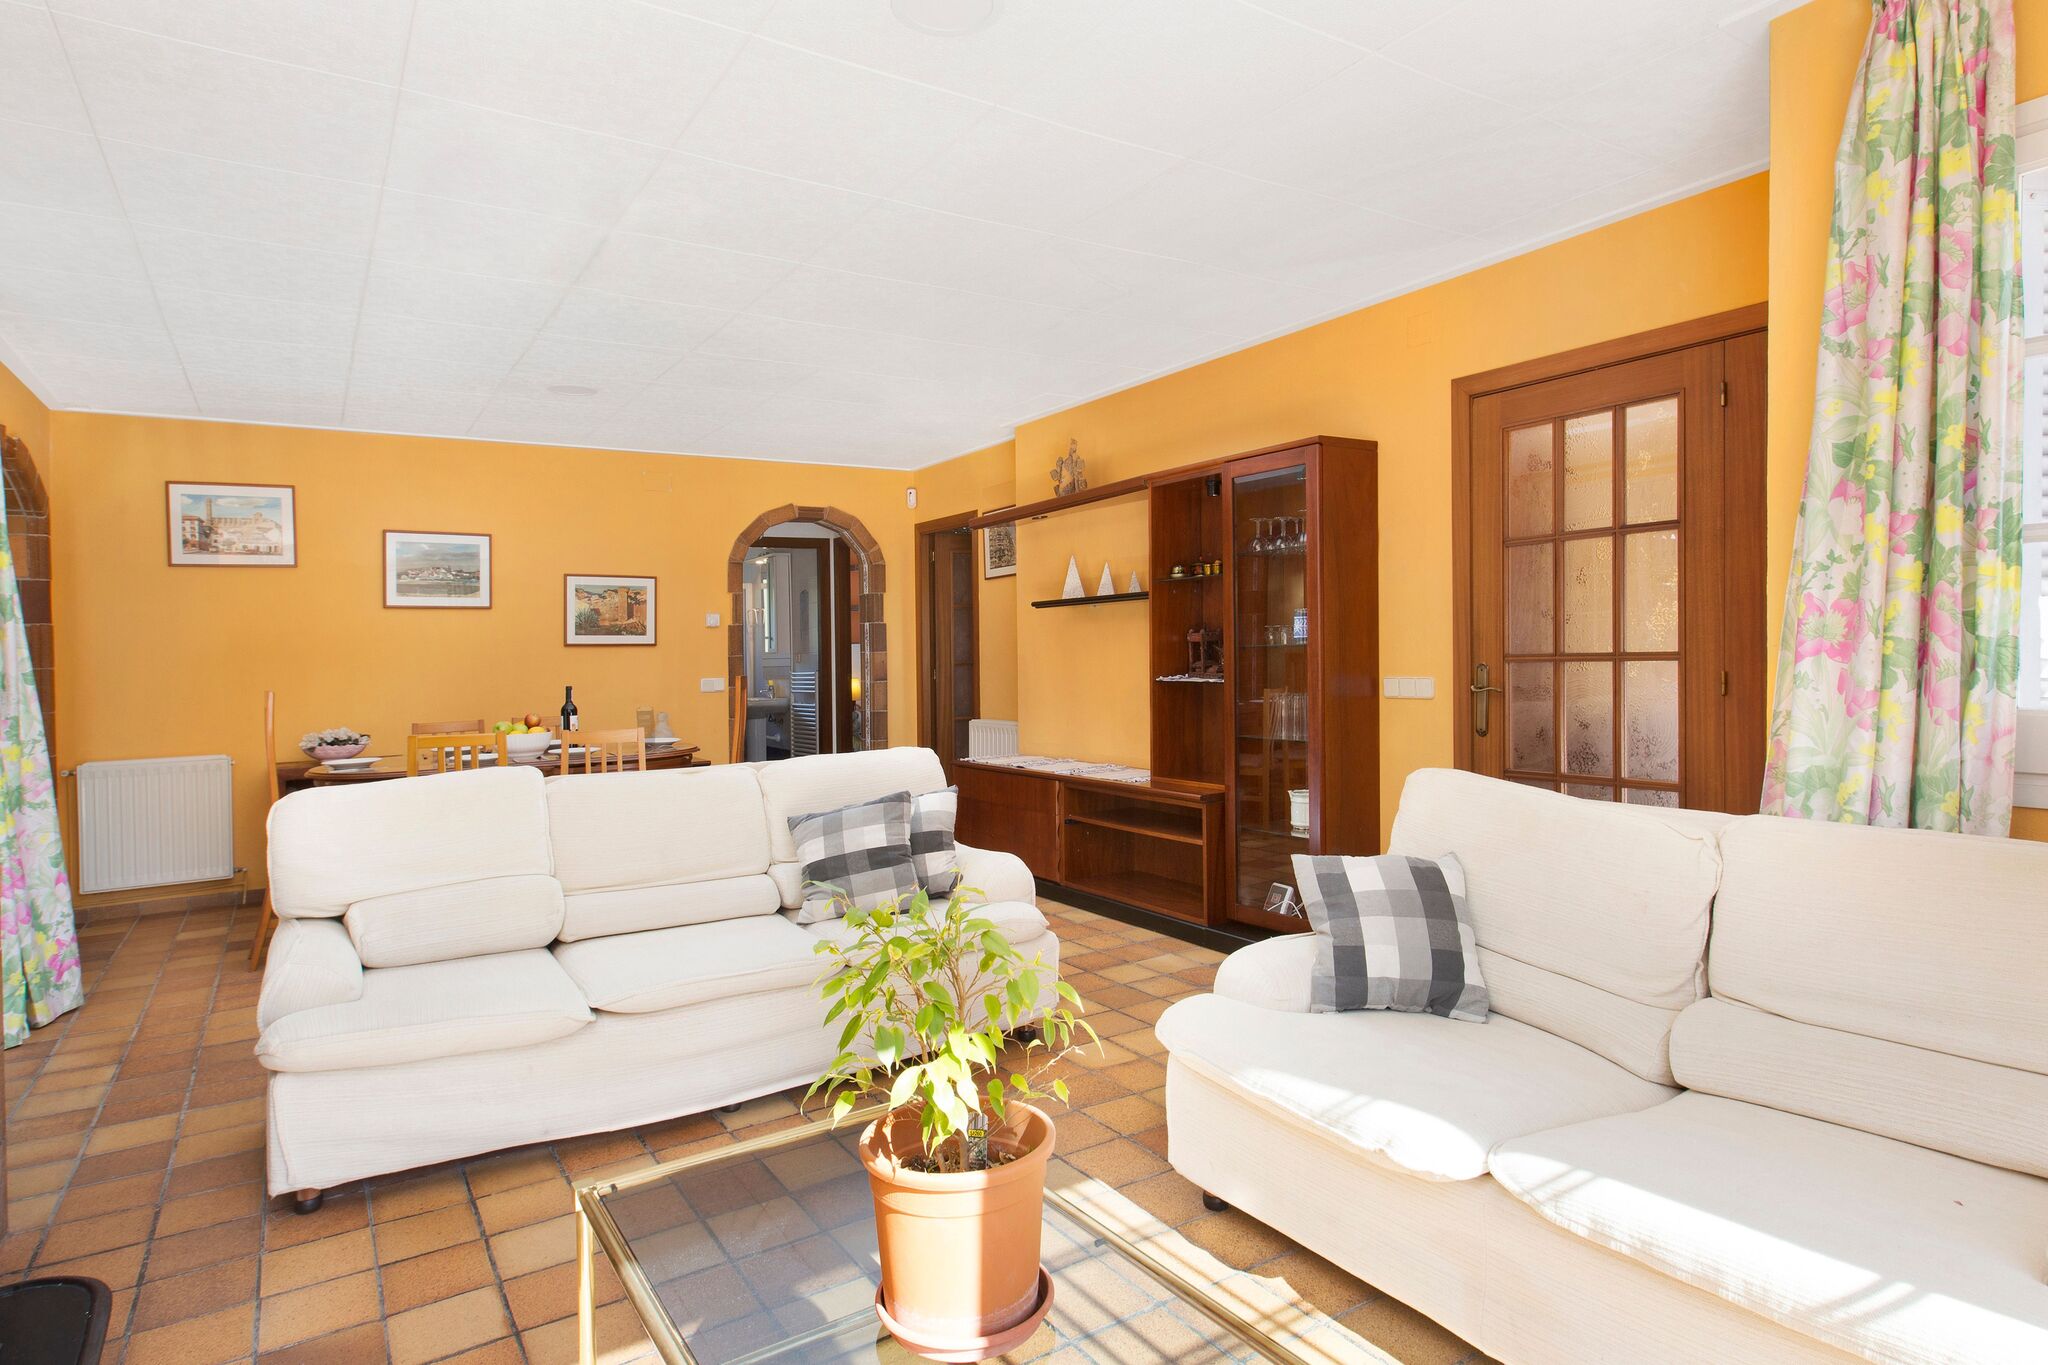 Charming 4 bedroom house in a very quiet area in Blanes